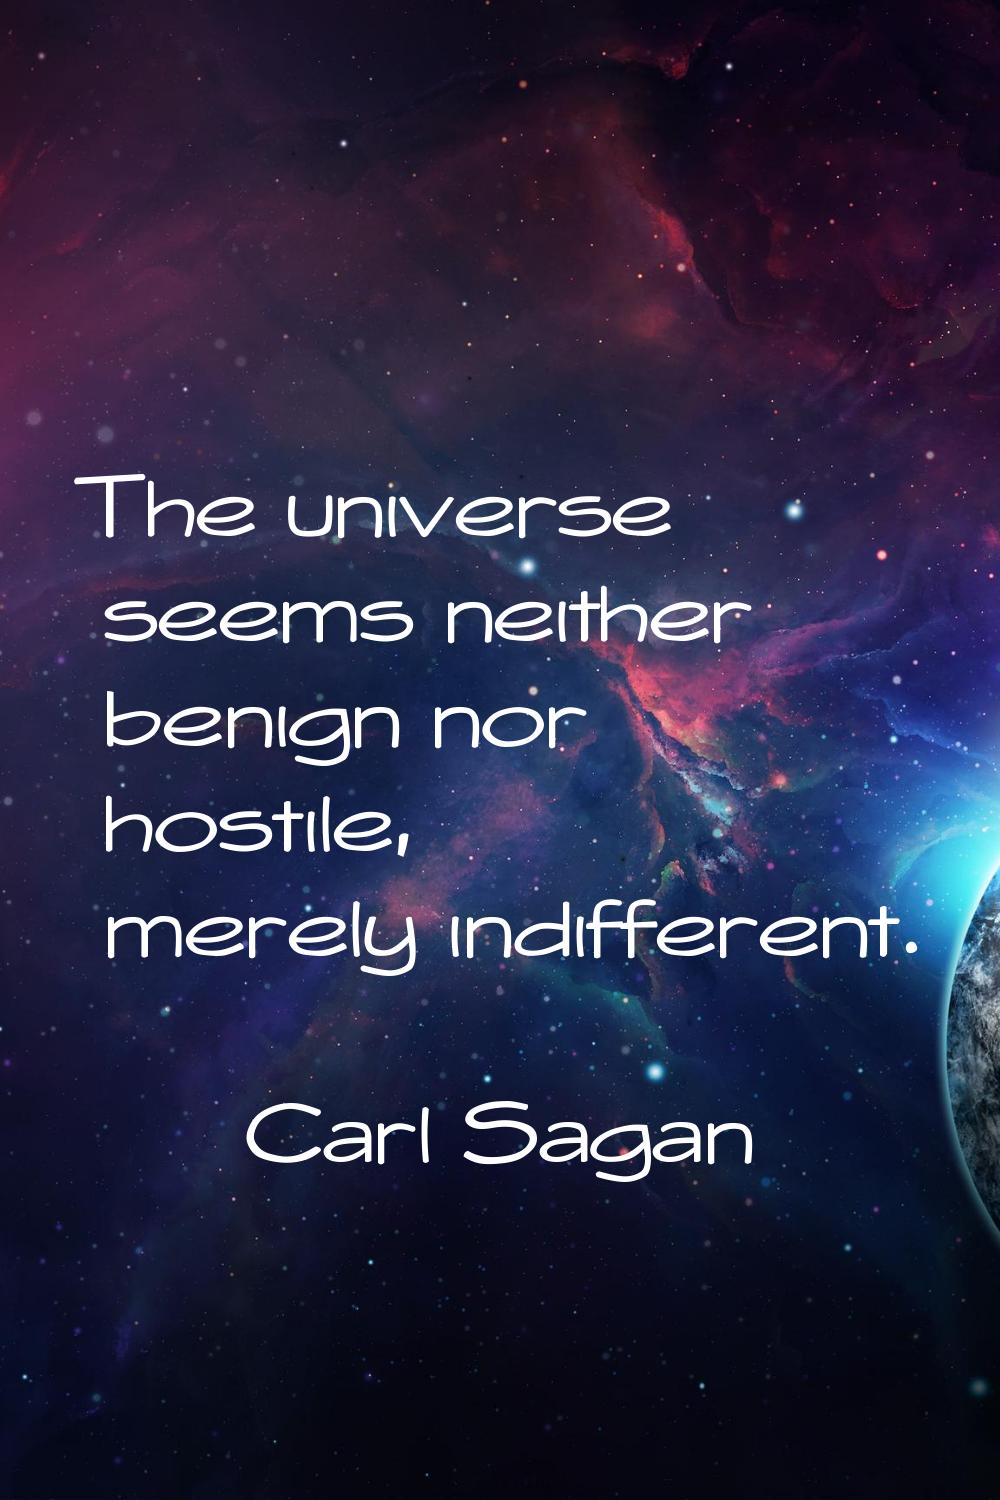 The universe seems neither benign nor hostile, merely indifferent.